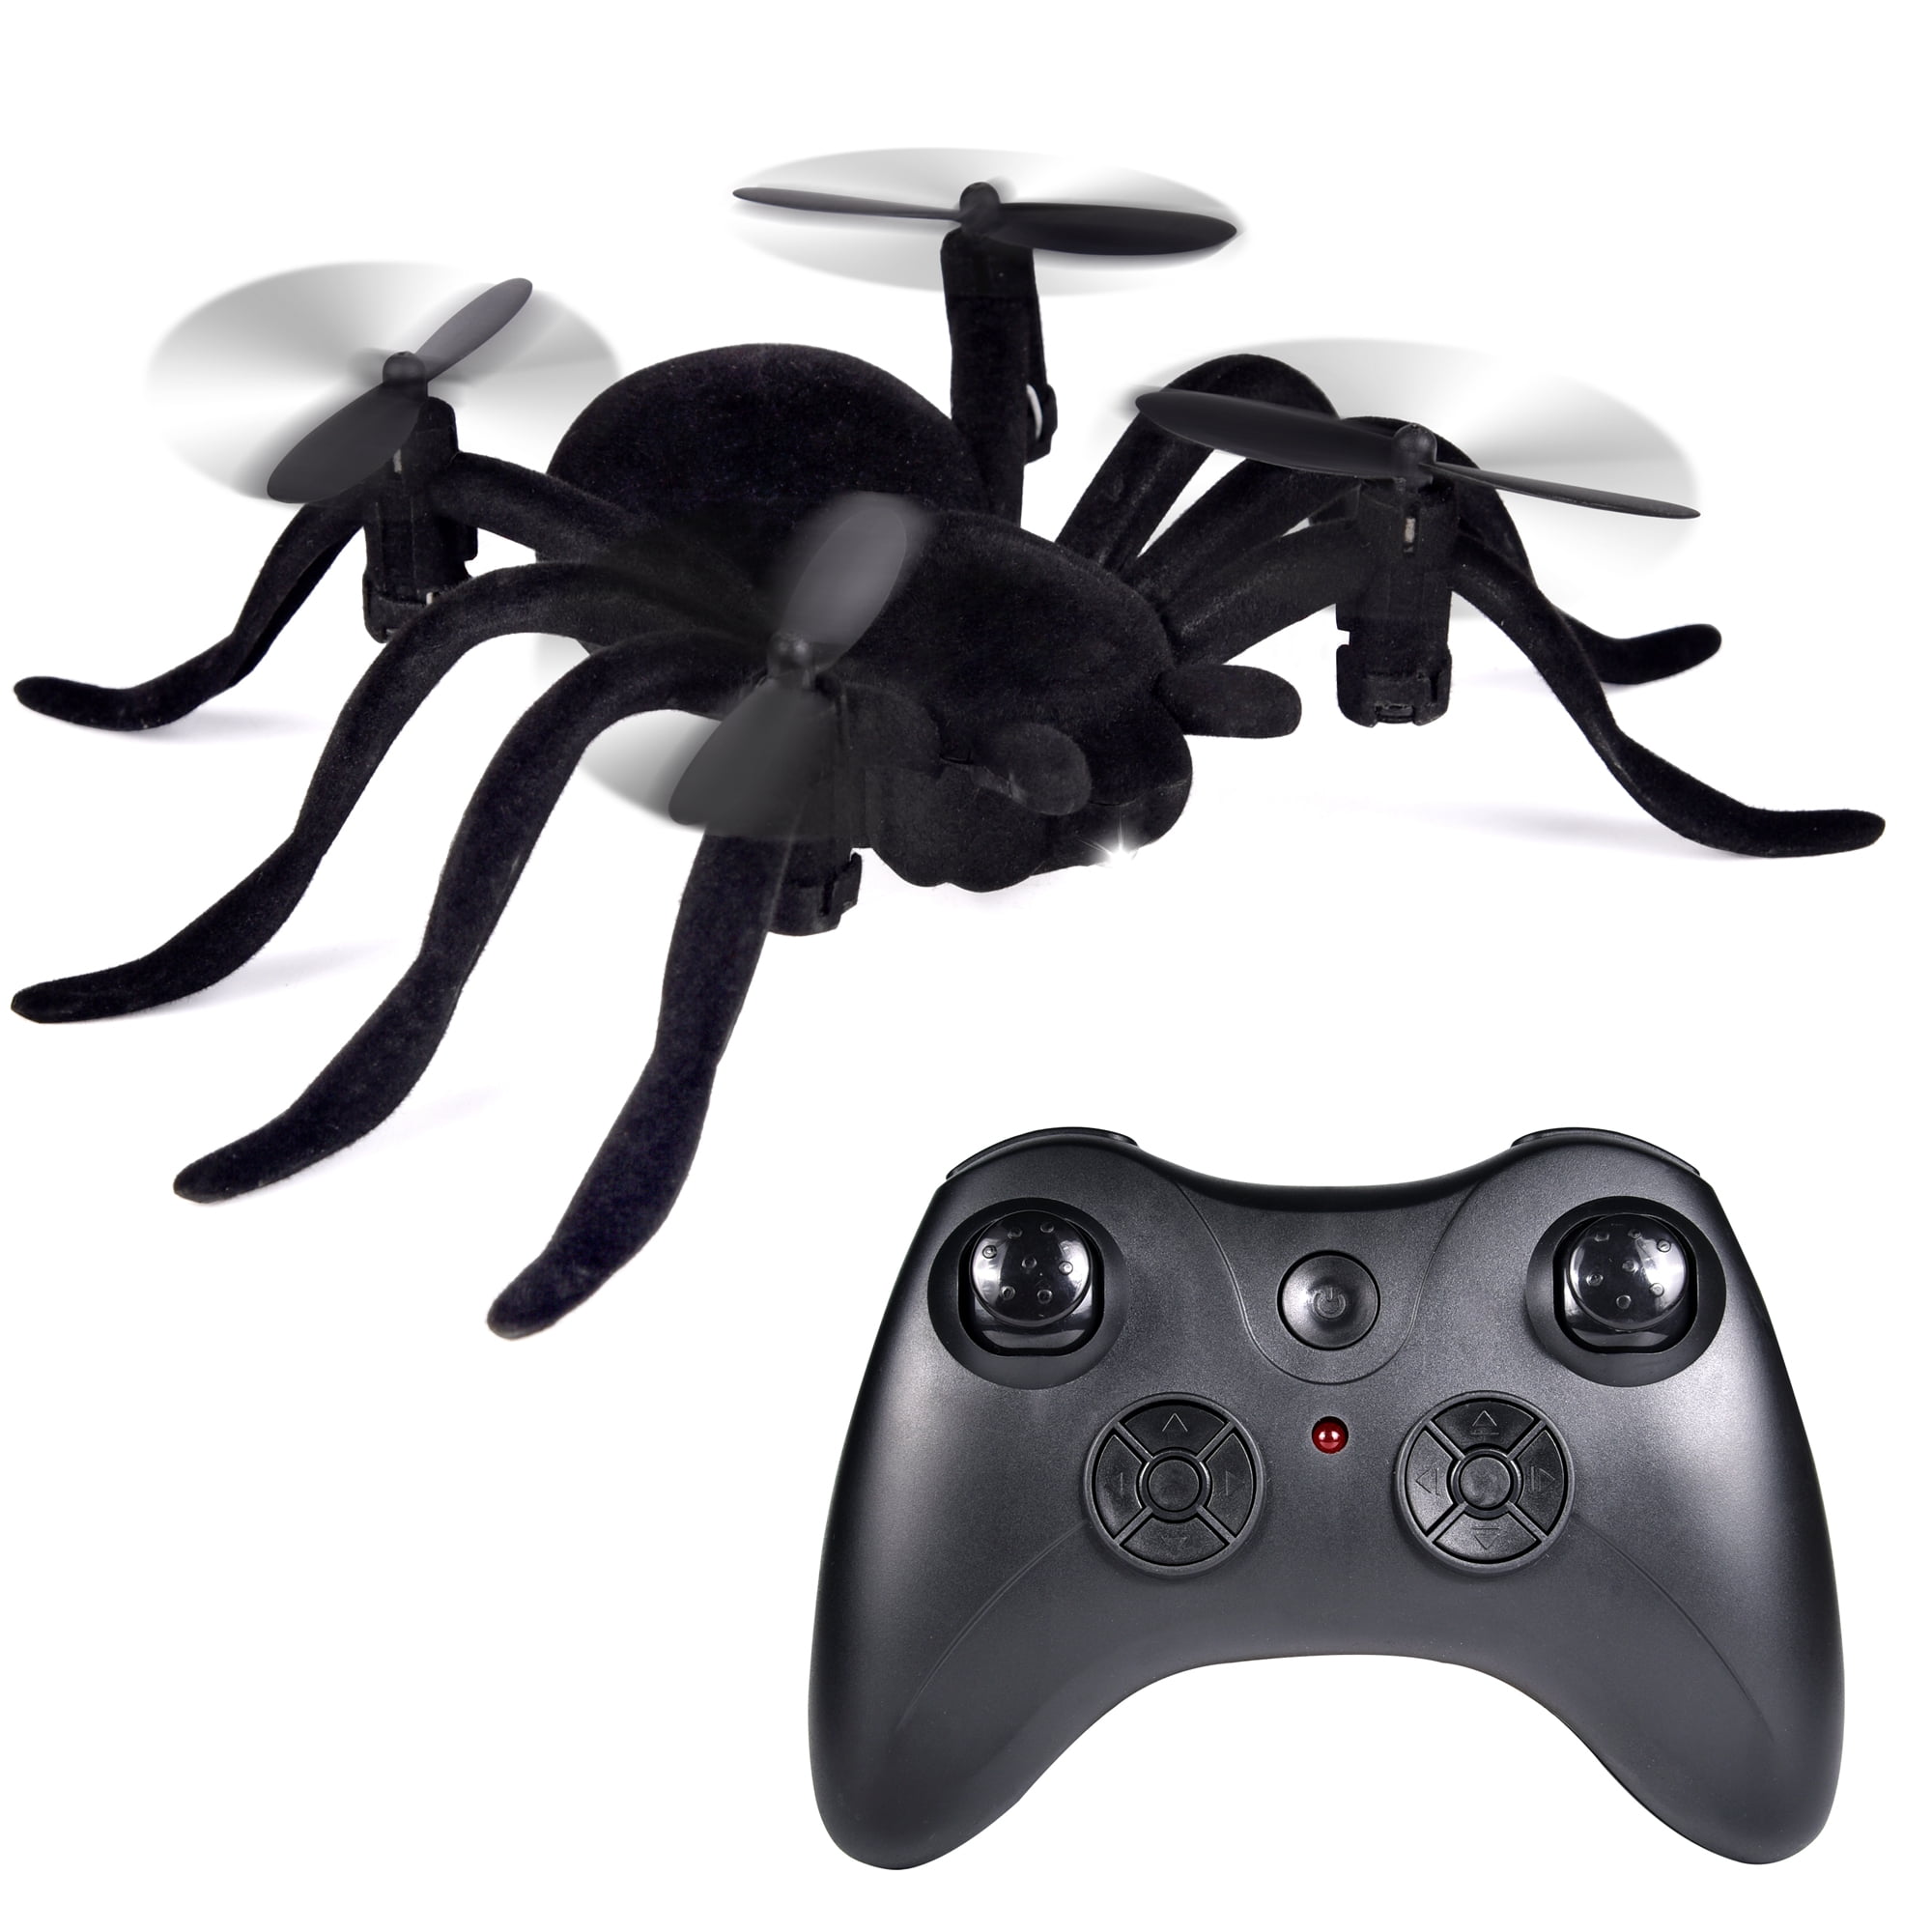 Details about   Mini Pocket Drone Quadcopter Built-In Camera 2.4GHz RC Remote Headless Altitude 